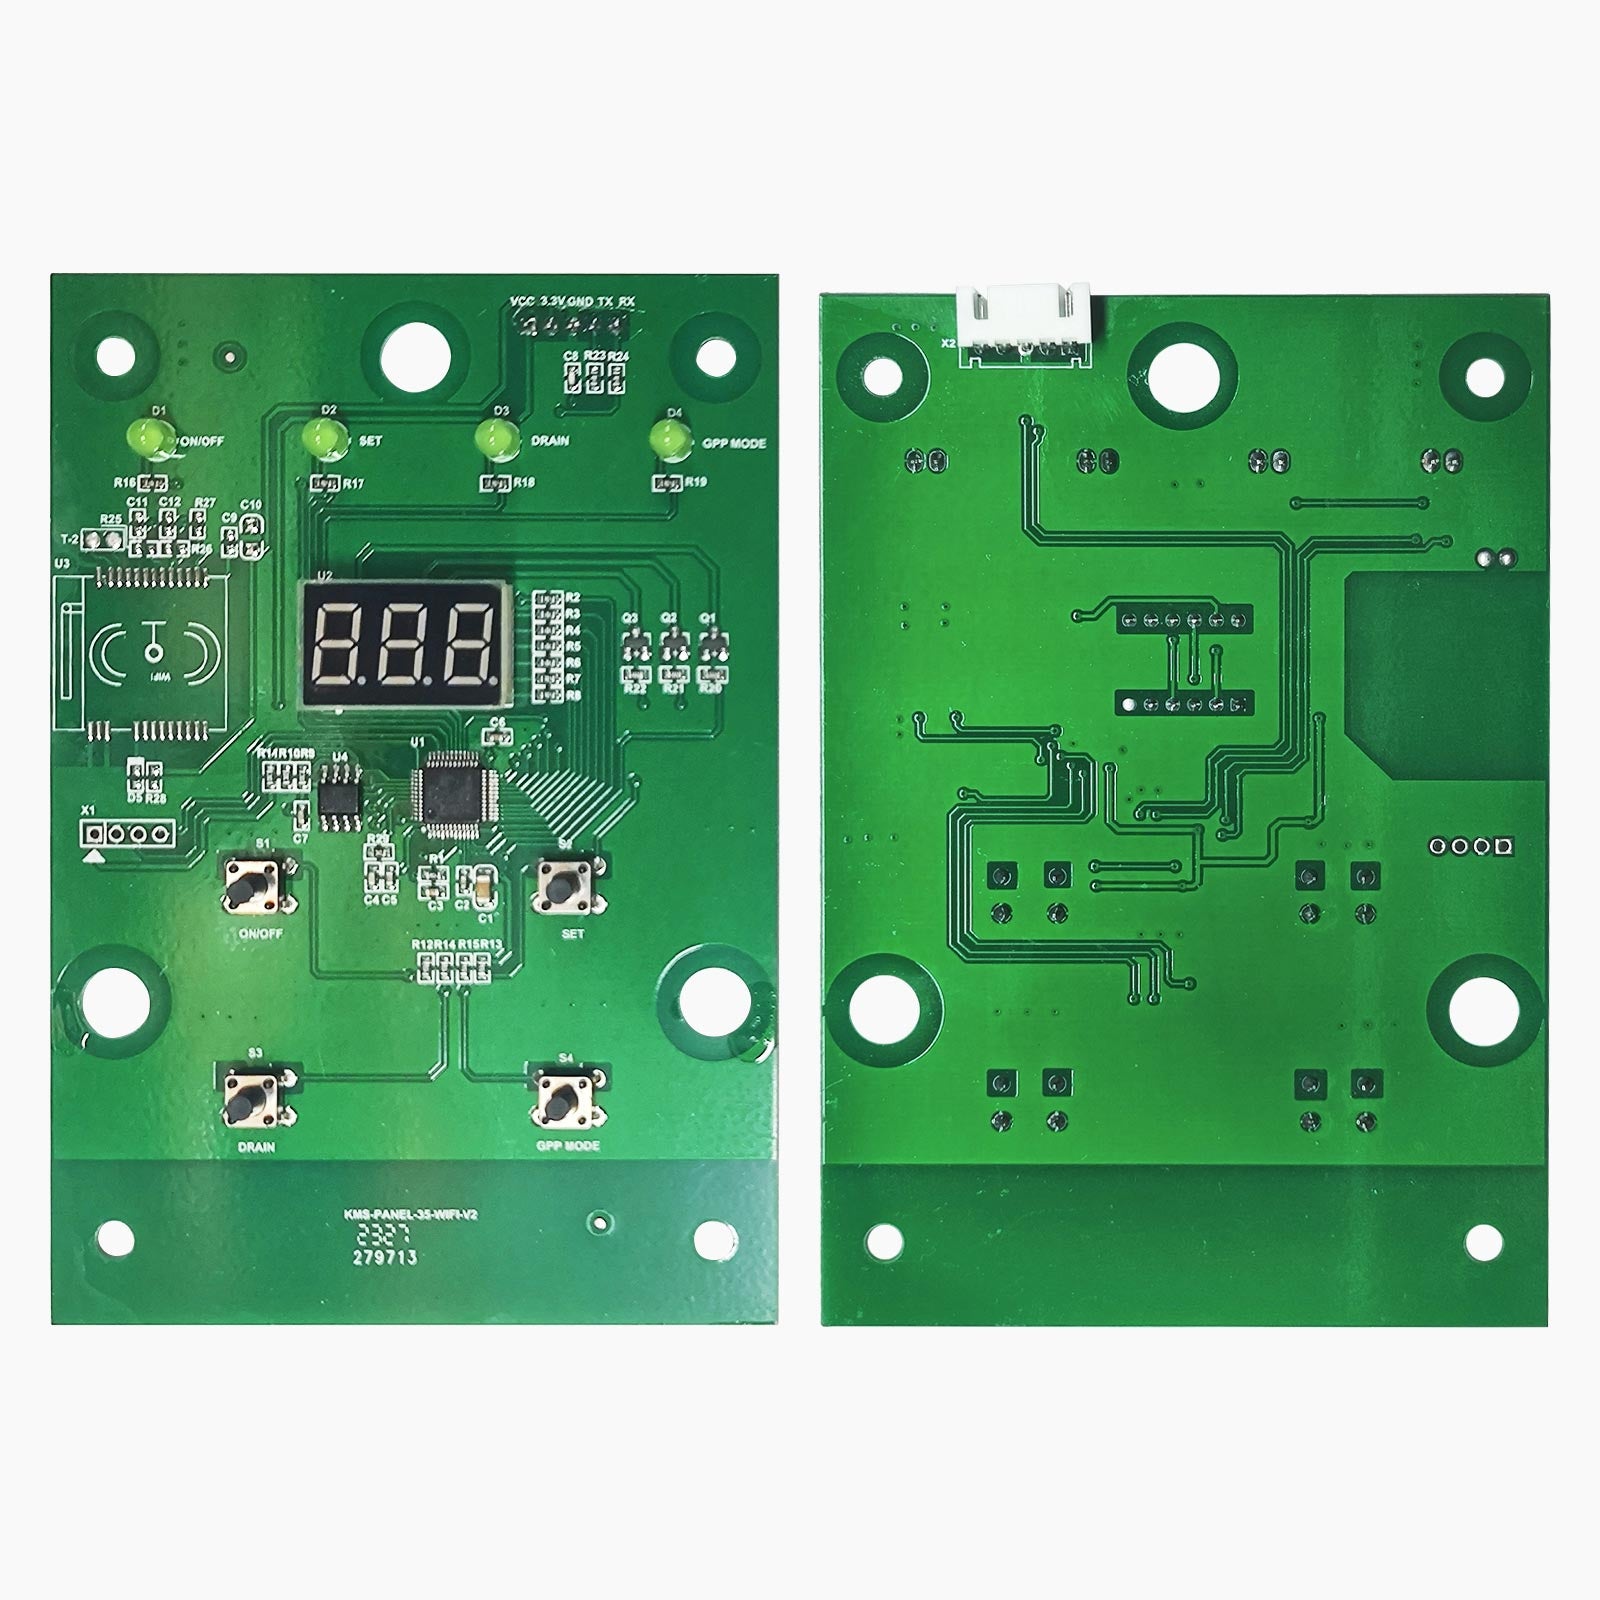 Display Operation board for AirWerx 35P